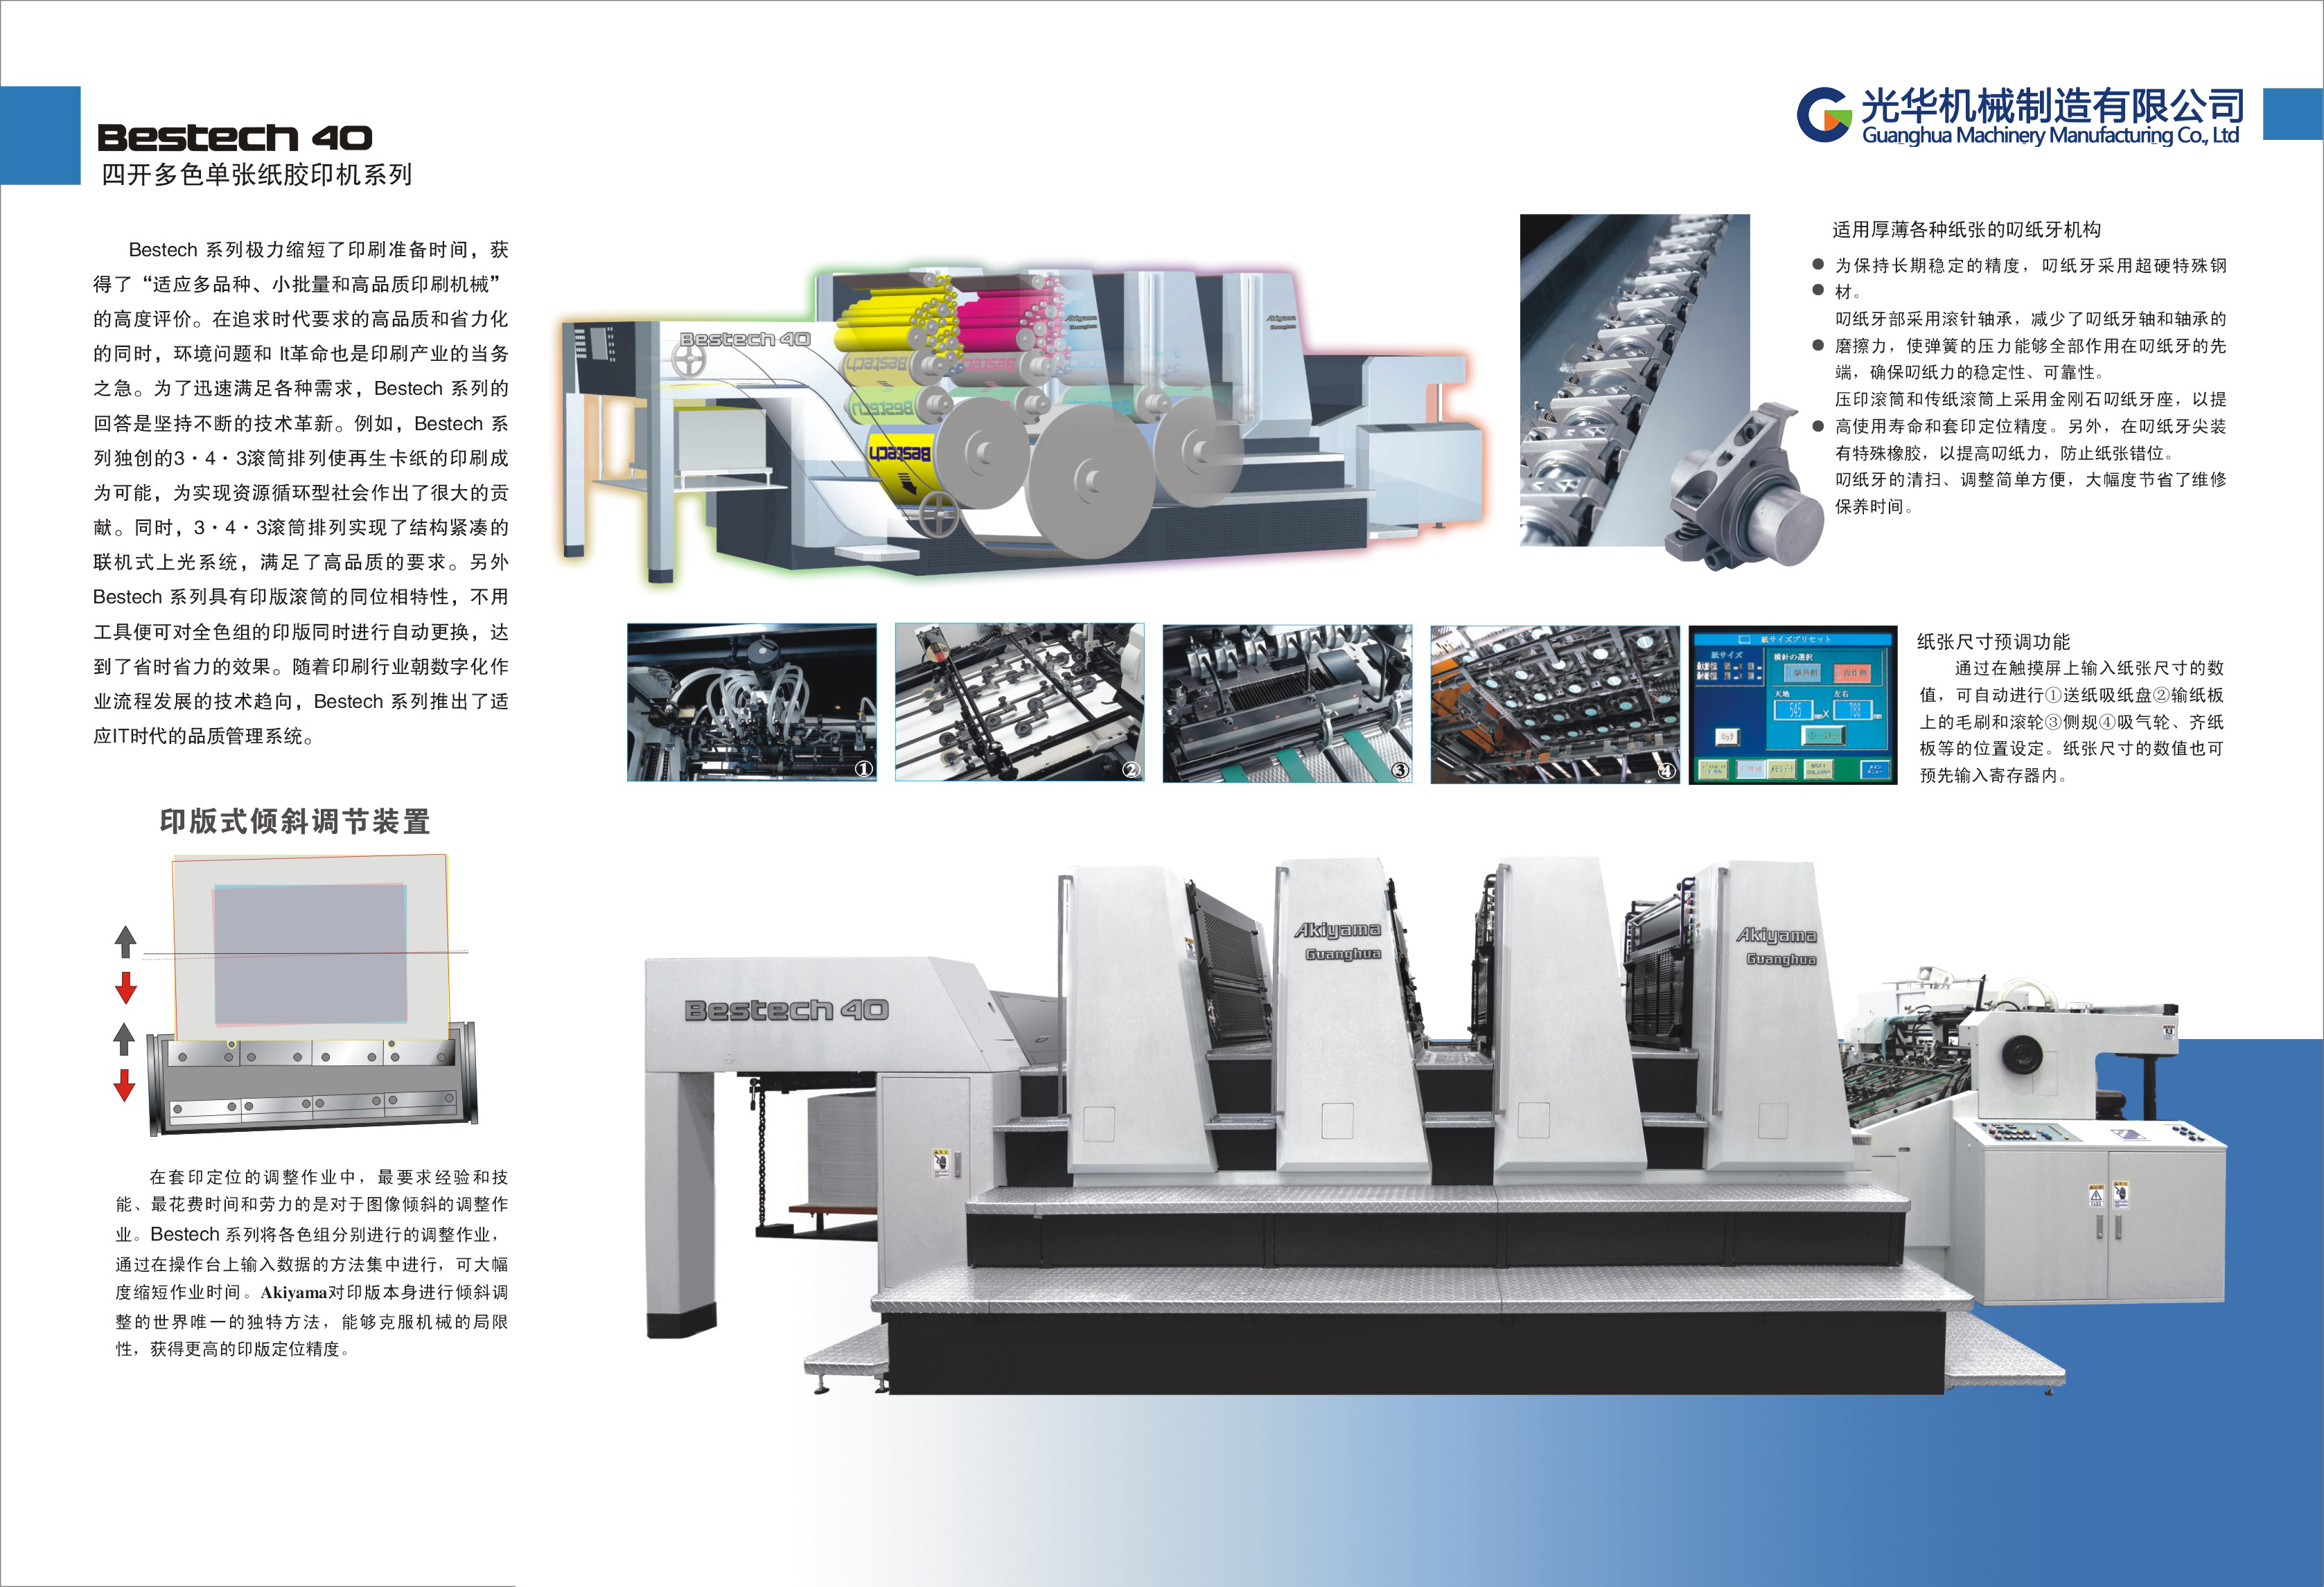 BESTECH-440  Single sheet four color offset printing machine